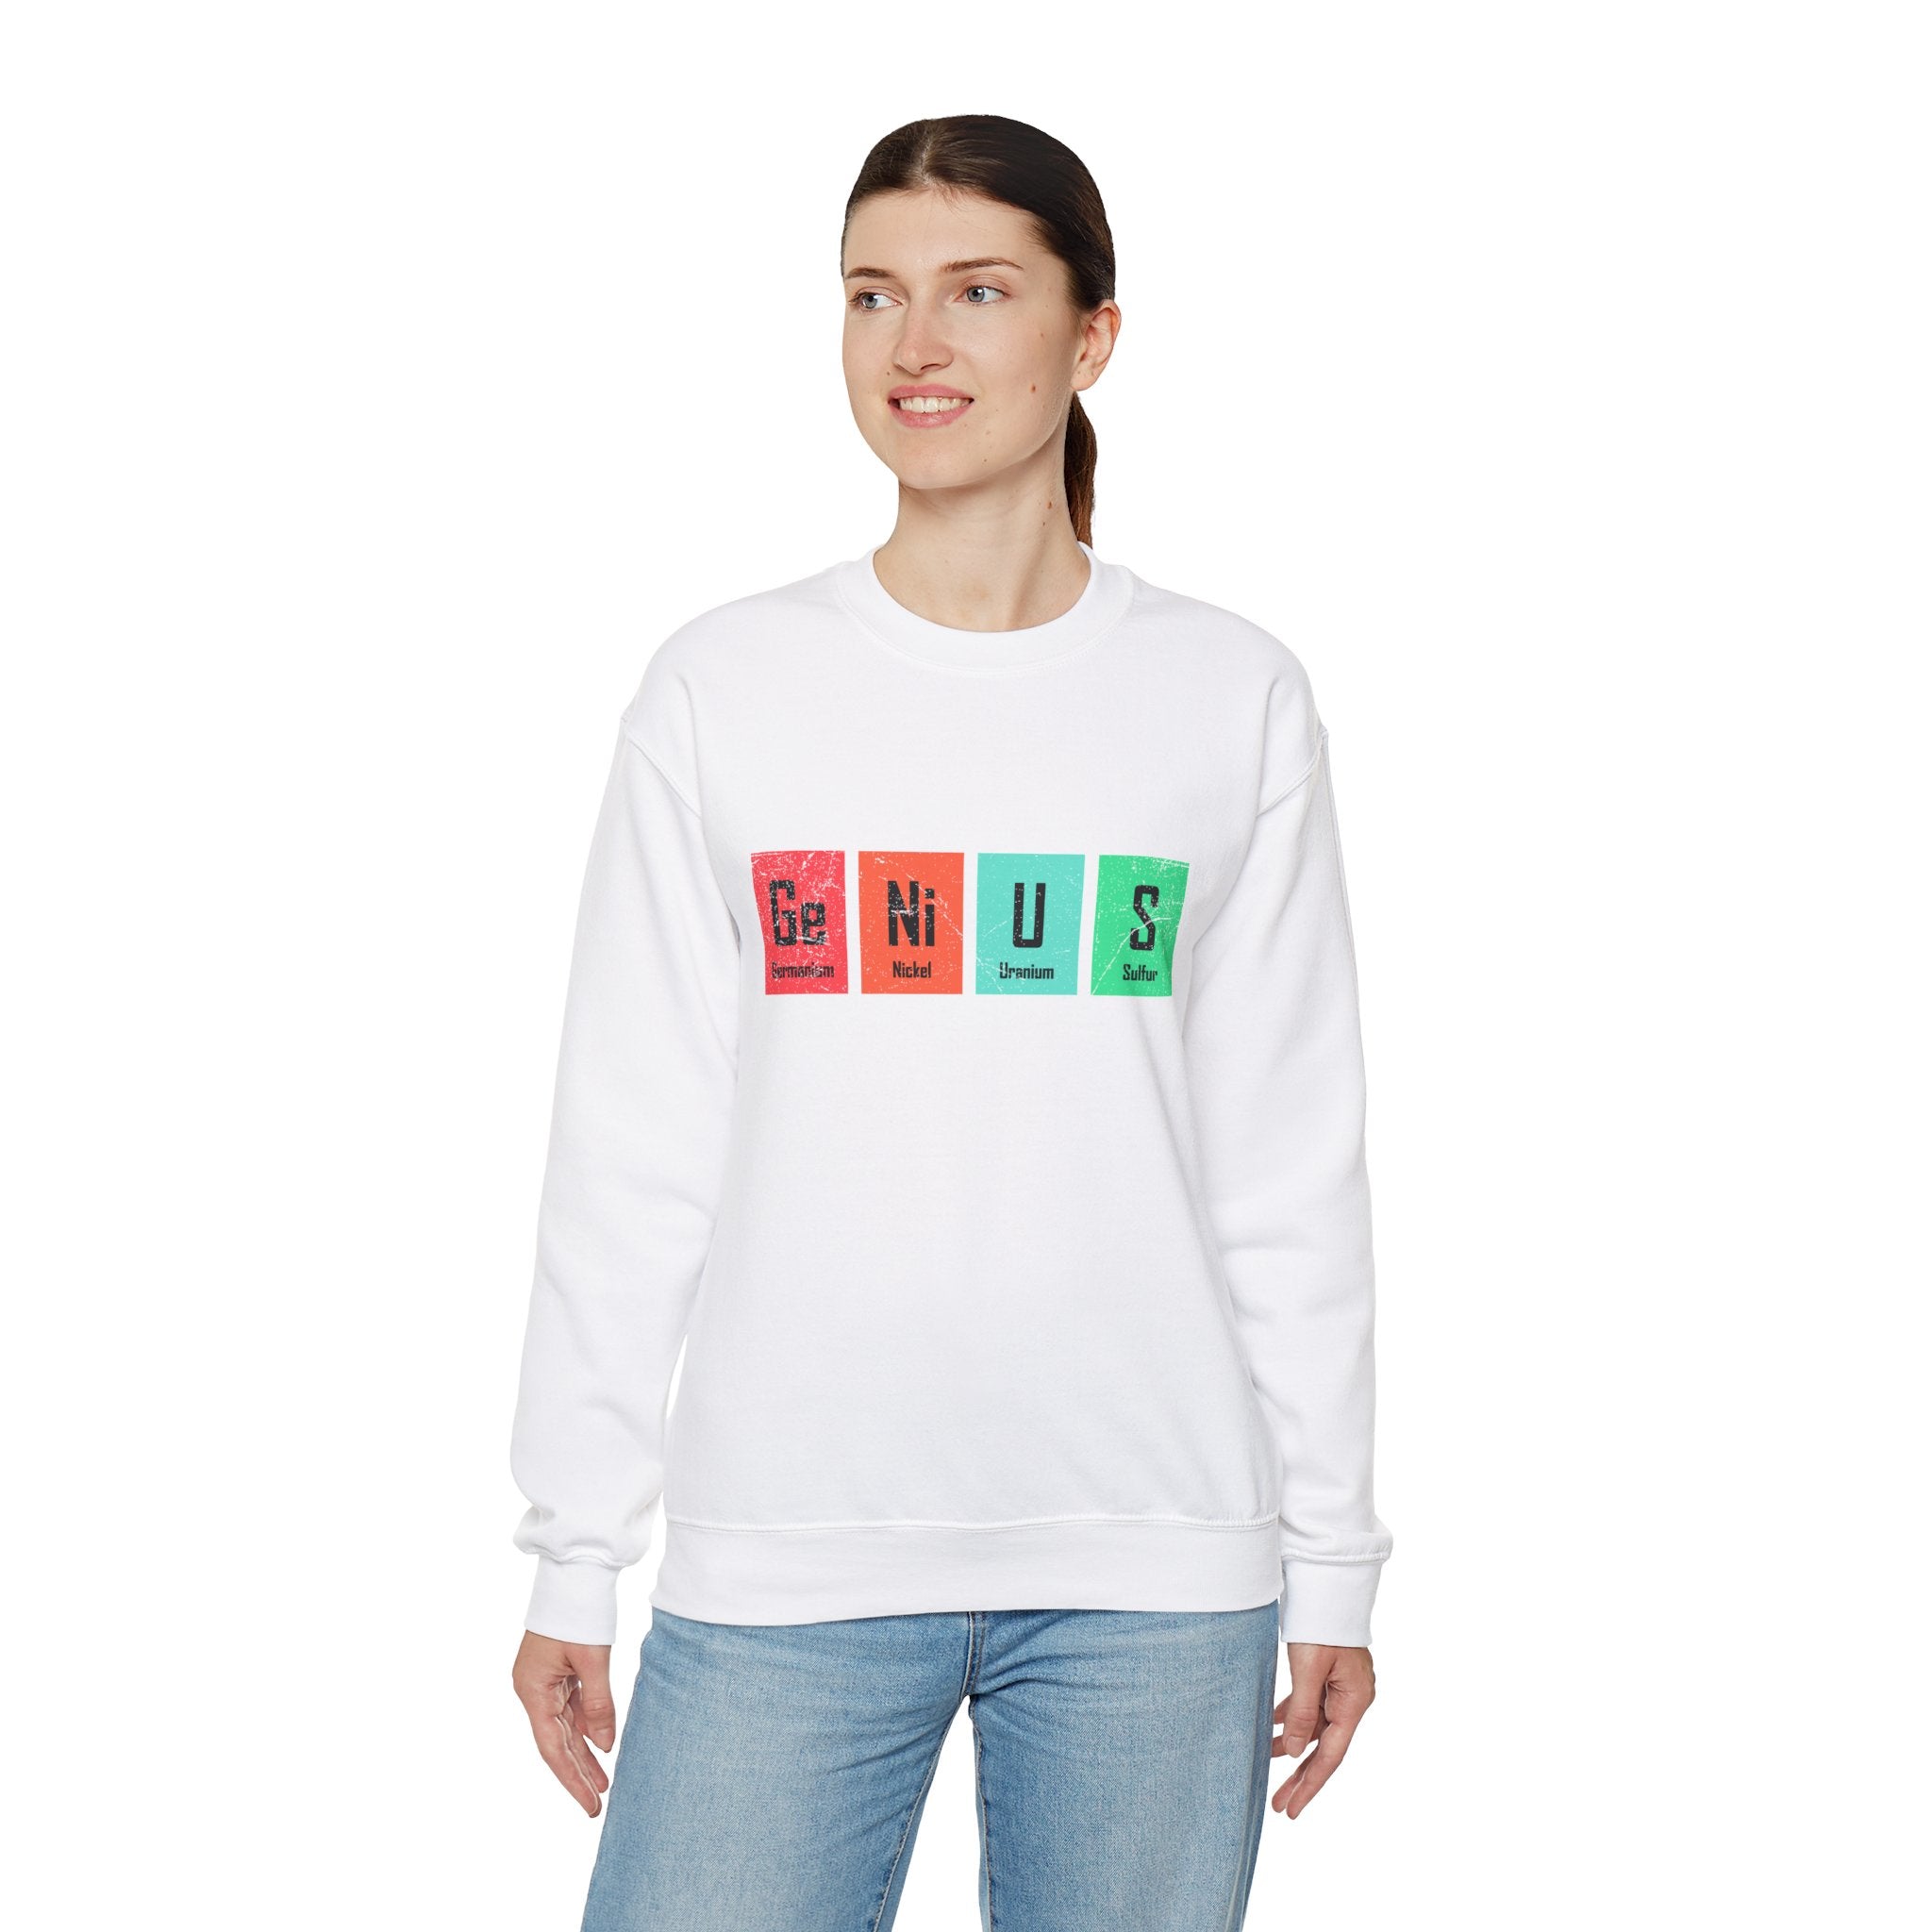 A person wearing a white Ge-Ni-U-S - Sweatshirt that radiates warmth, with the word "GENIUS" spelled out in colorful blocks on the front. The person is looking to their left and has their hair pulled back.